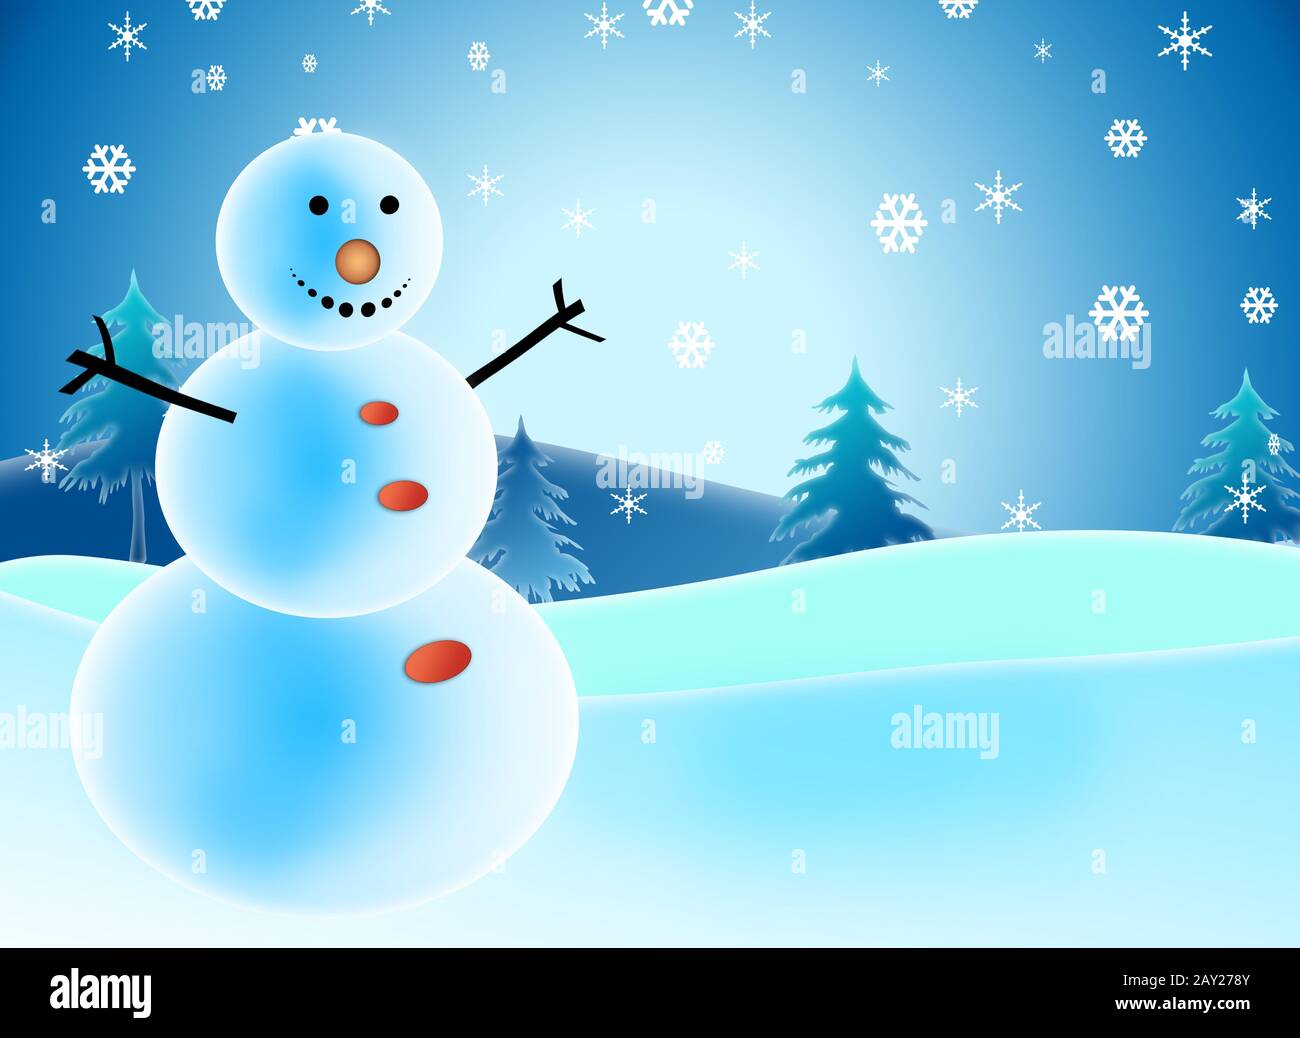 snowman illustrations for christmas greetings card Stock Photo